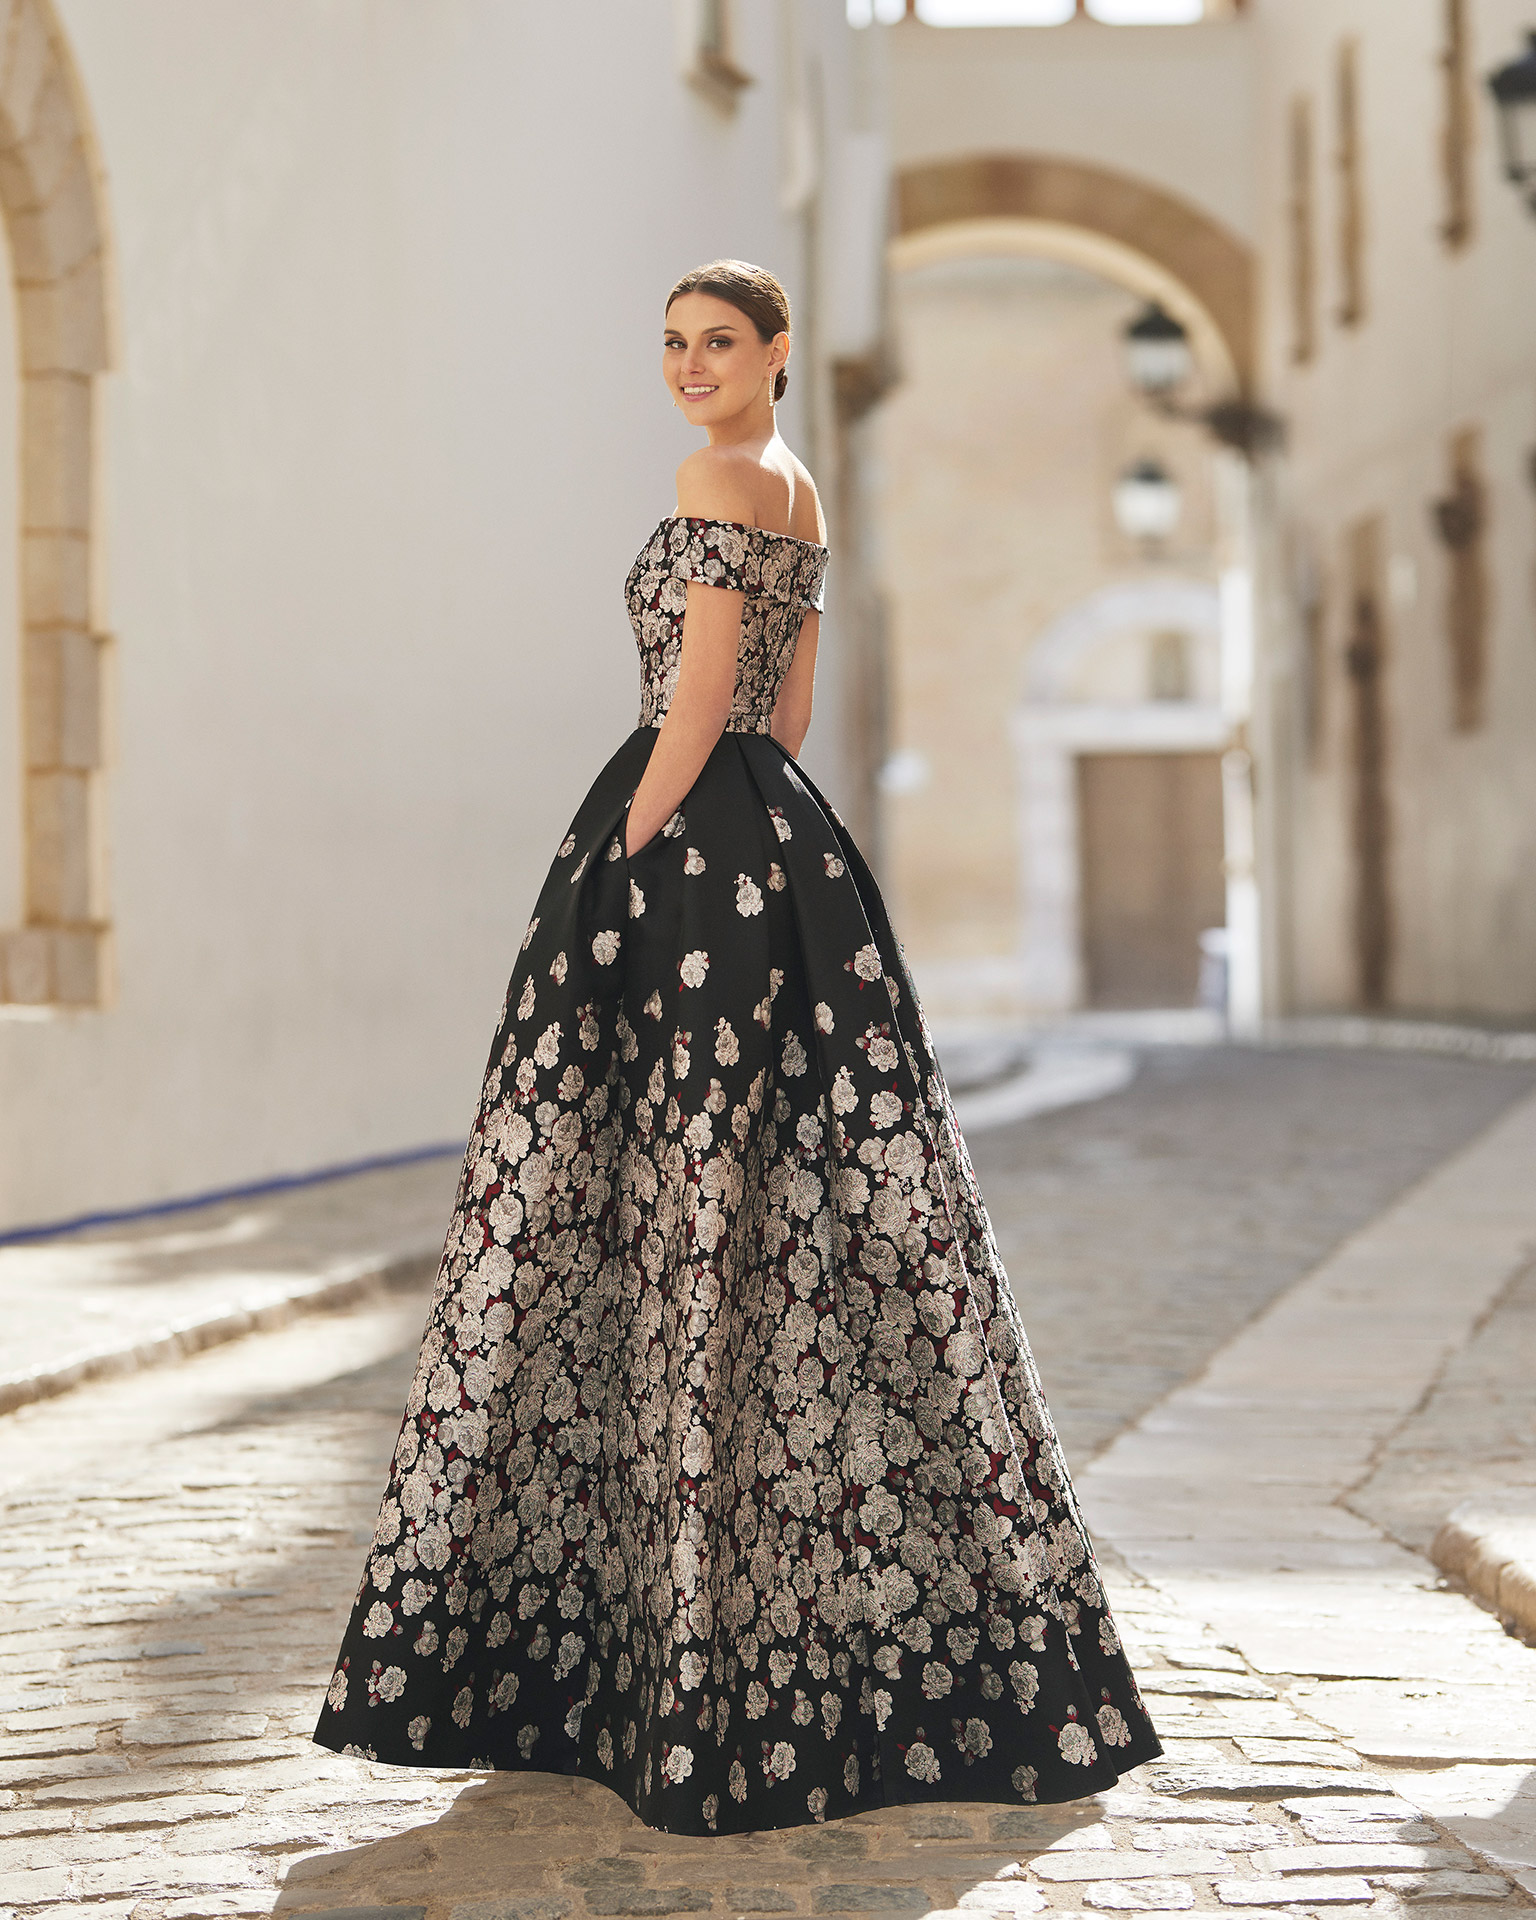 Brocade cocktail dress. Off-the-shoulder neckline and low back. With shawl. 2022 MARFIL_BARCELONA Collection.